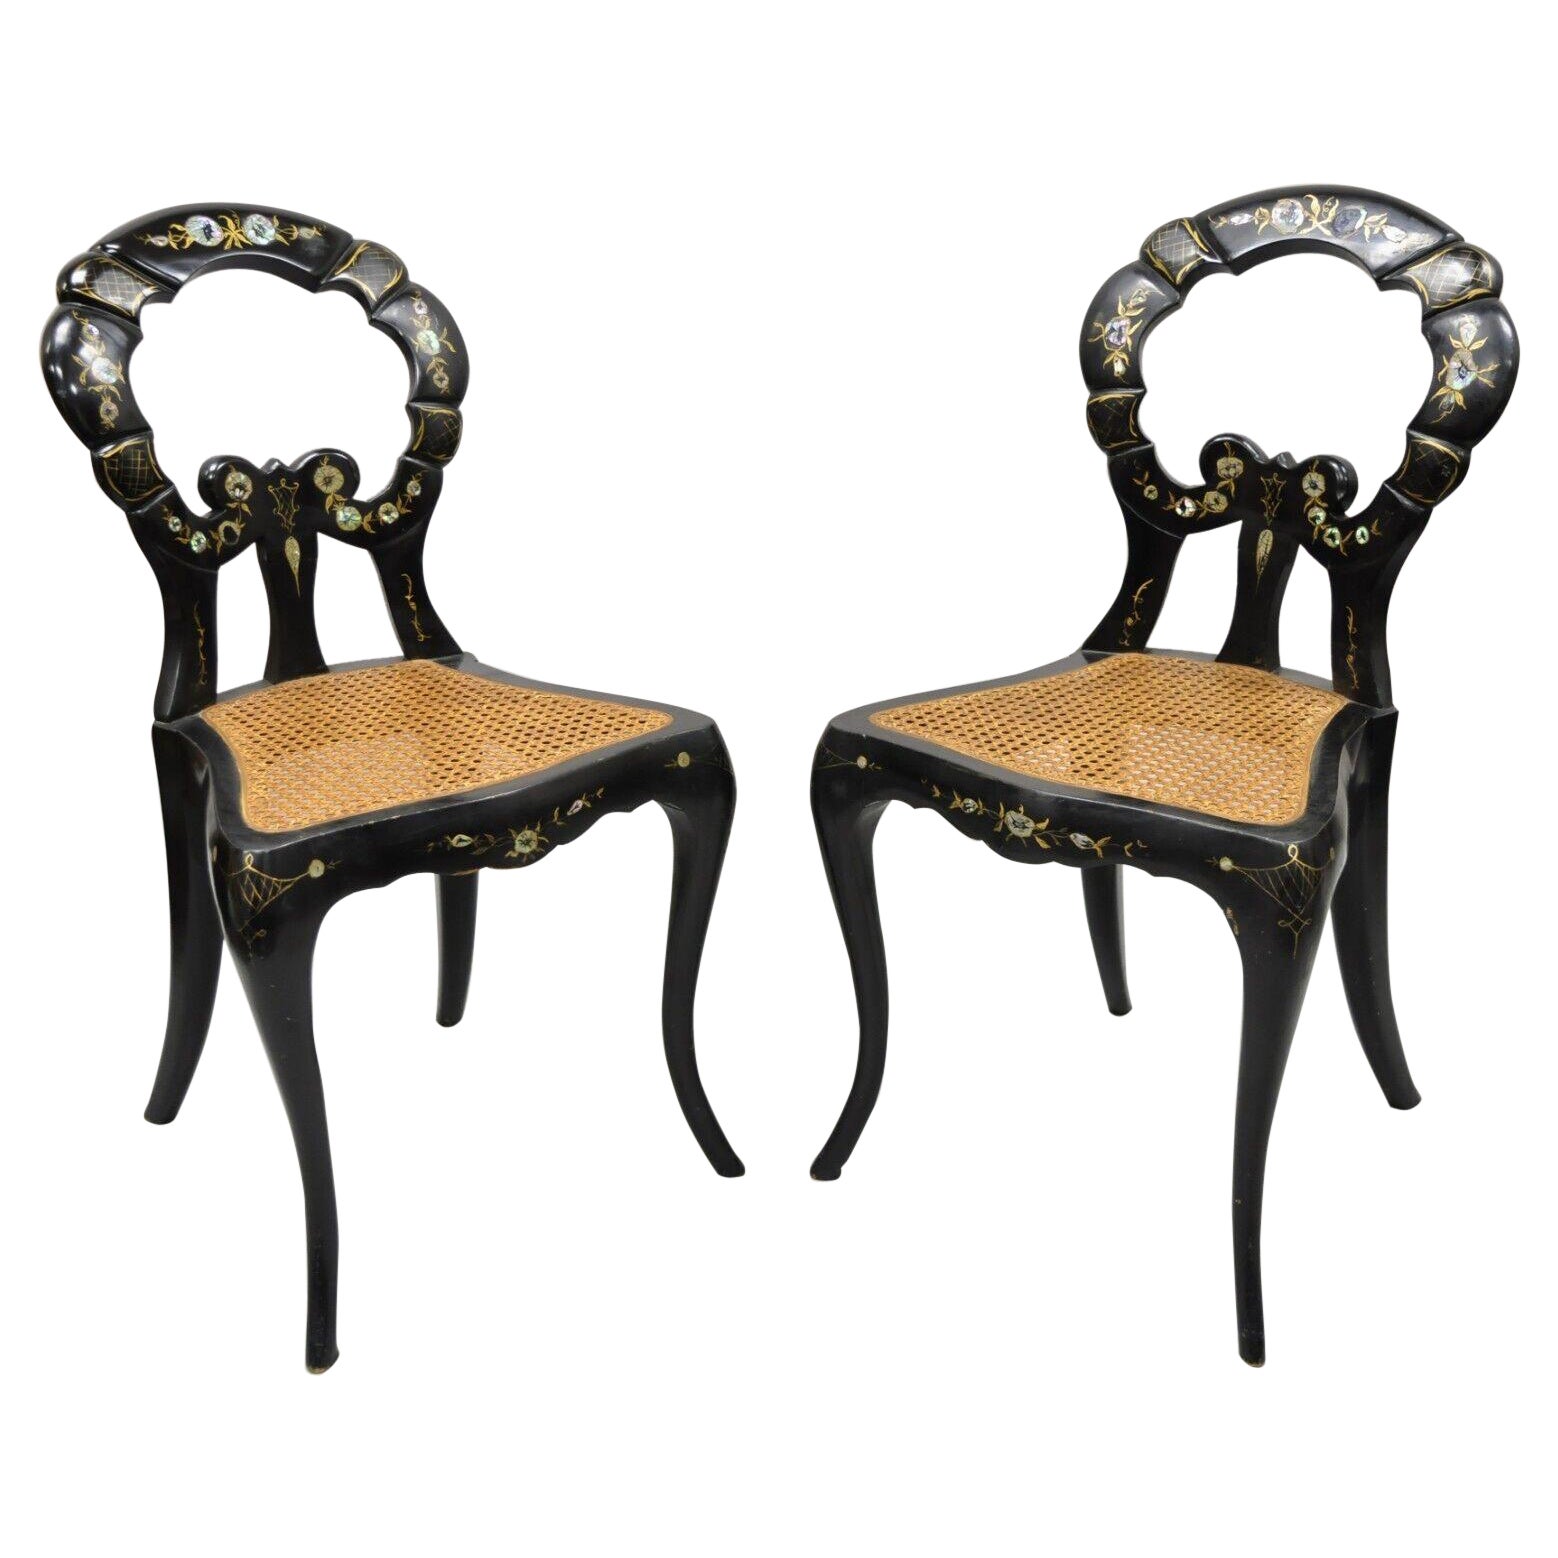 Antique English Regency Mother of Pearl Inlay Black Ebonized Side Chair - a Pair For Sale